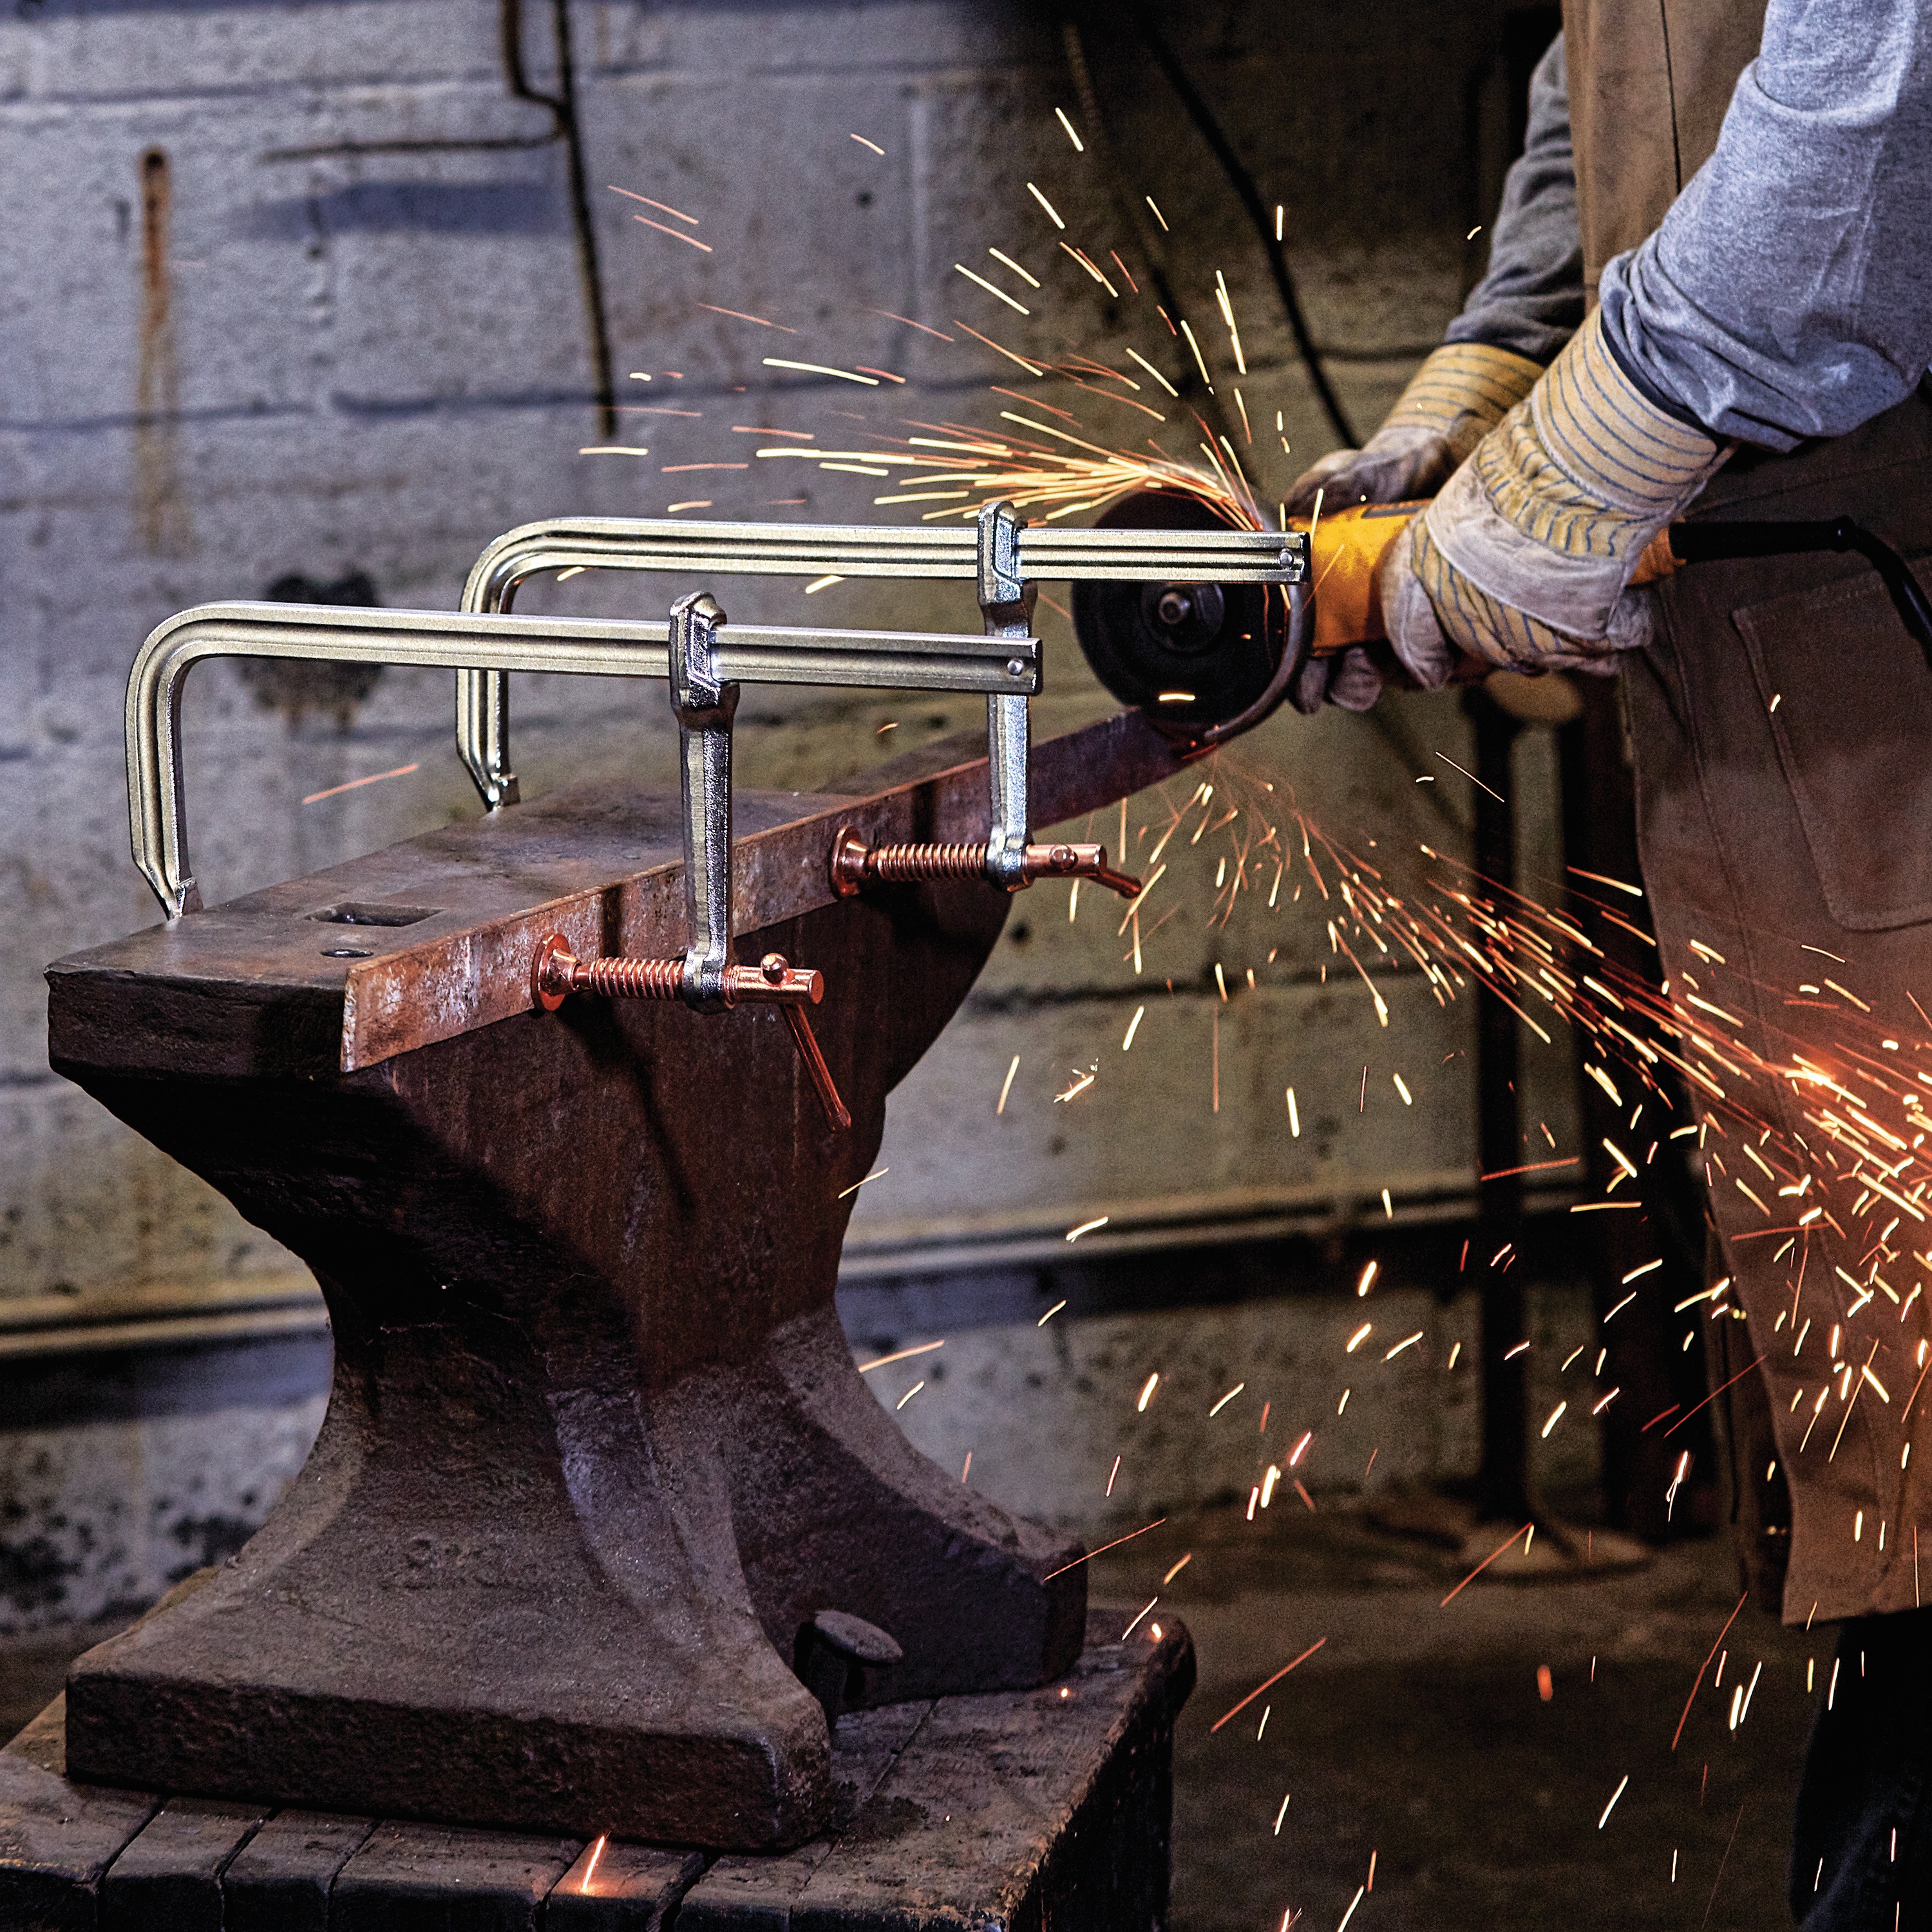 12 inch Metalworking bar Clamp being used by a person in a workshop.